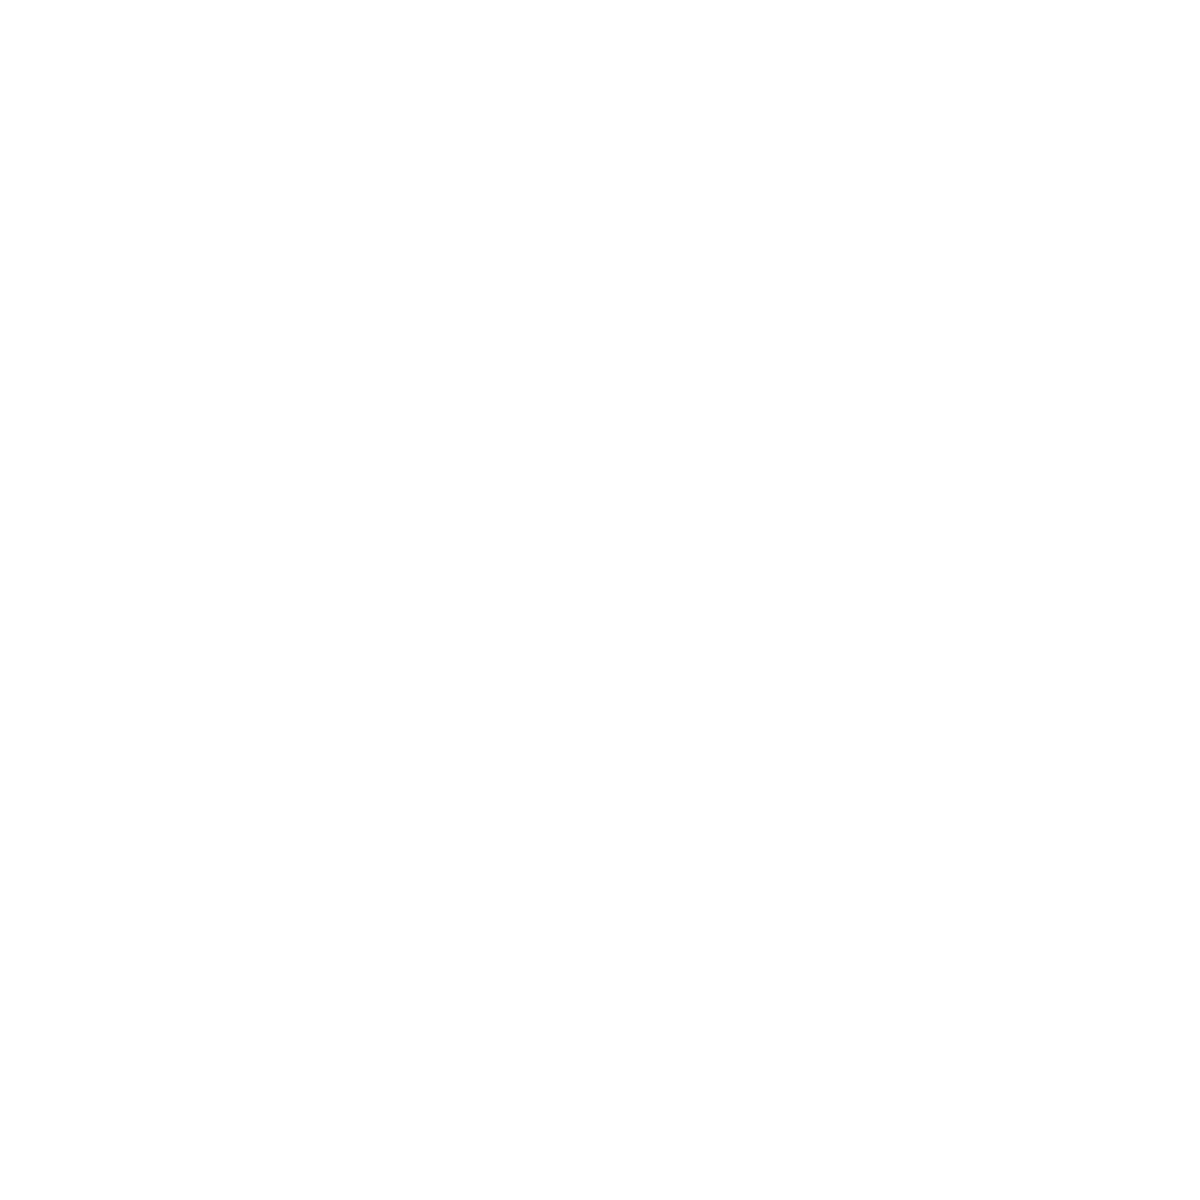 document icon for obfuscation